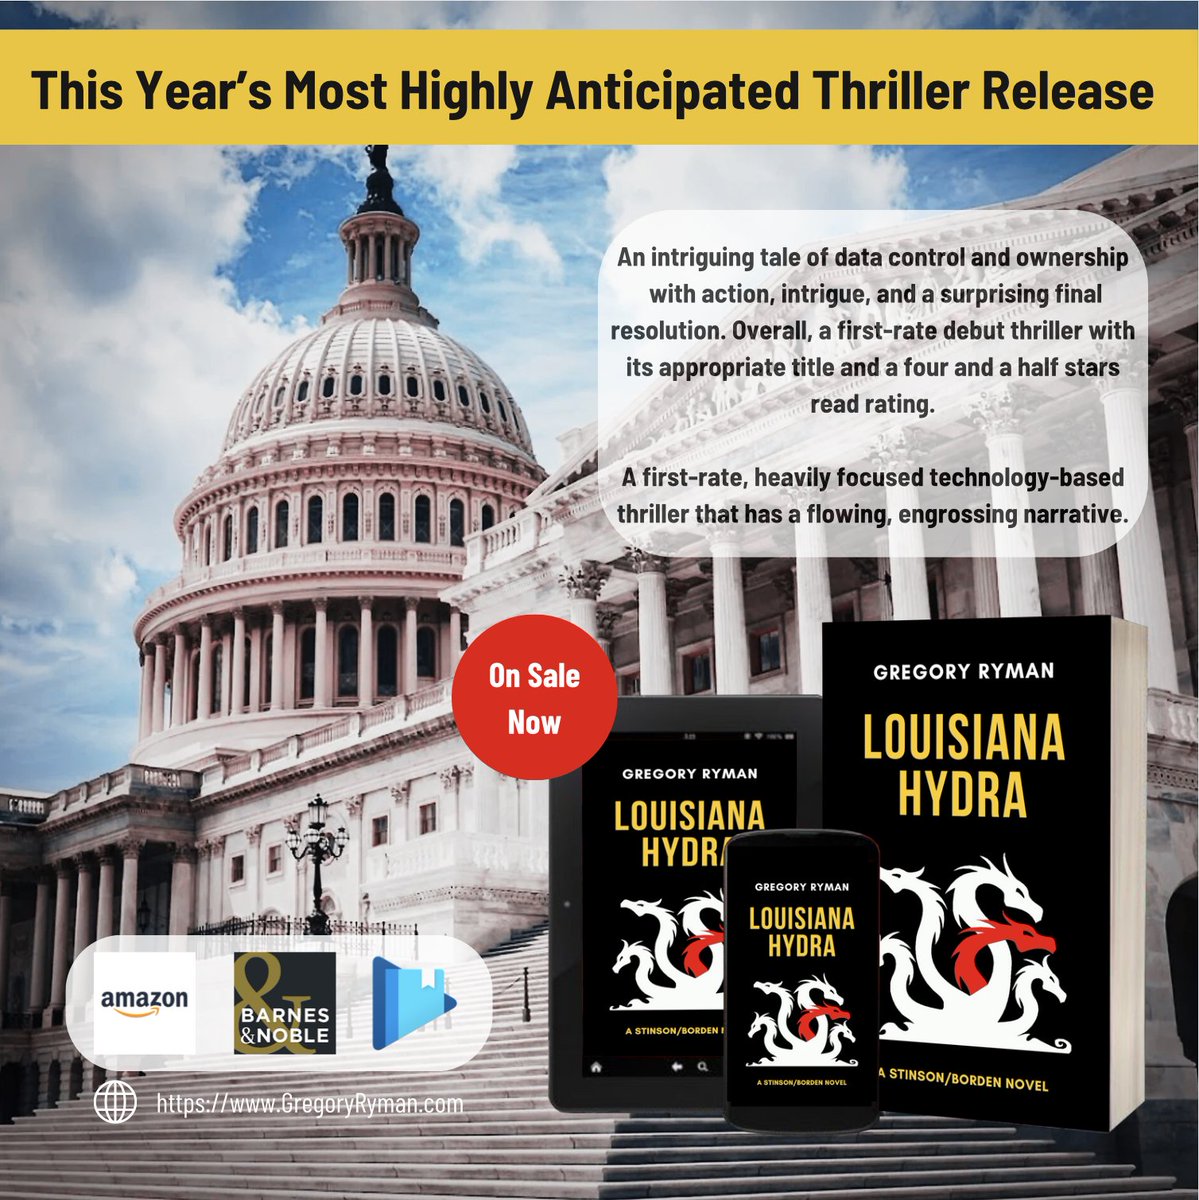 'Gregory Ryman wrote a captivating, page-turner! He gave us interesting characters and an in-depth, well-thought-out plot. It’s hard to believe this is his first book!' (Review - Kim/GoodReads - May 4) #louisianahydra #booklovers  #mysterybooks #thrillerbooks #politicalthriller